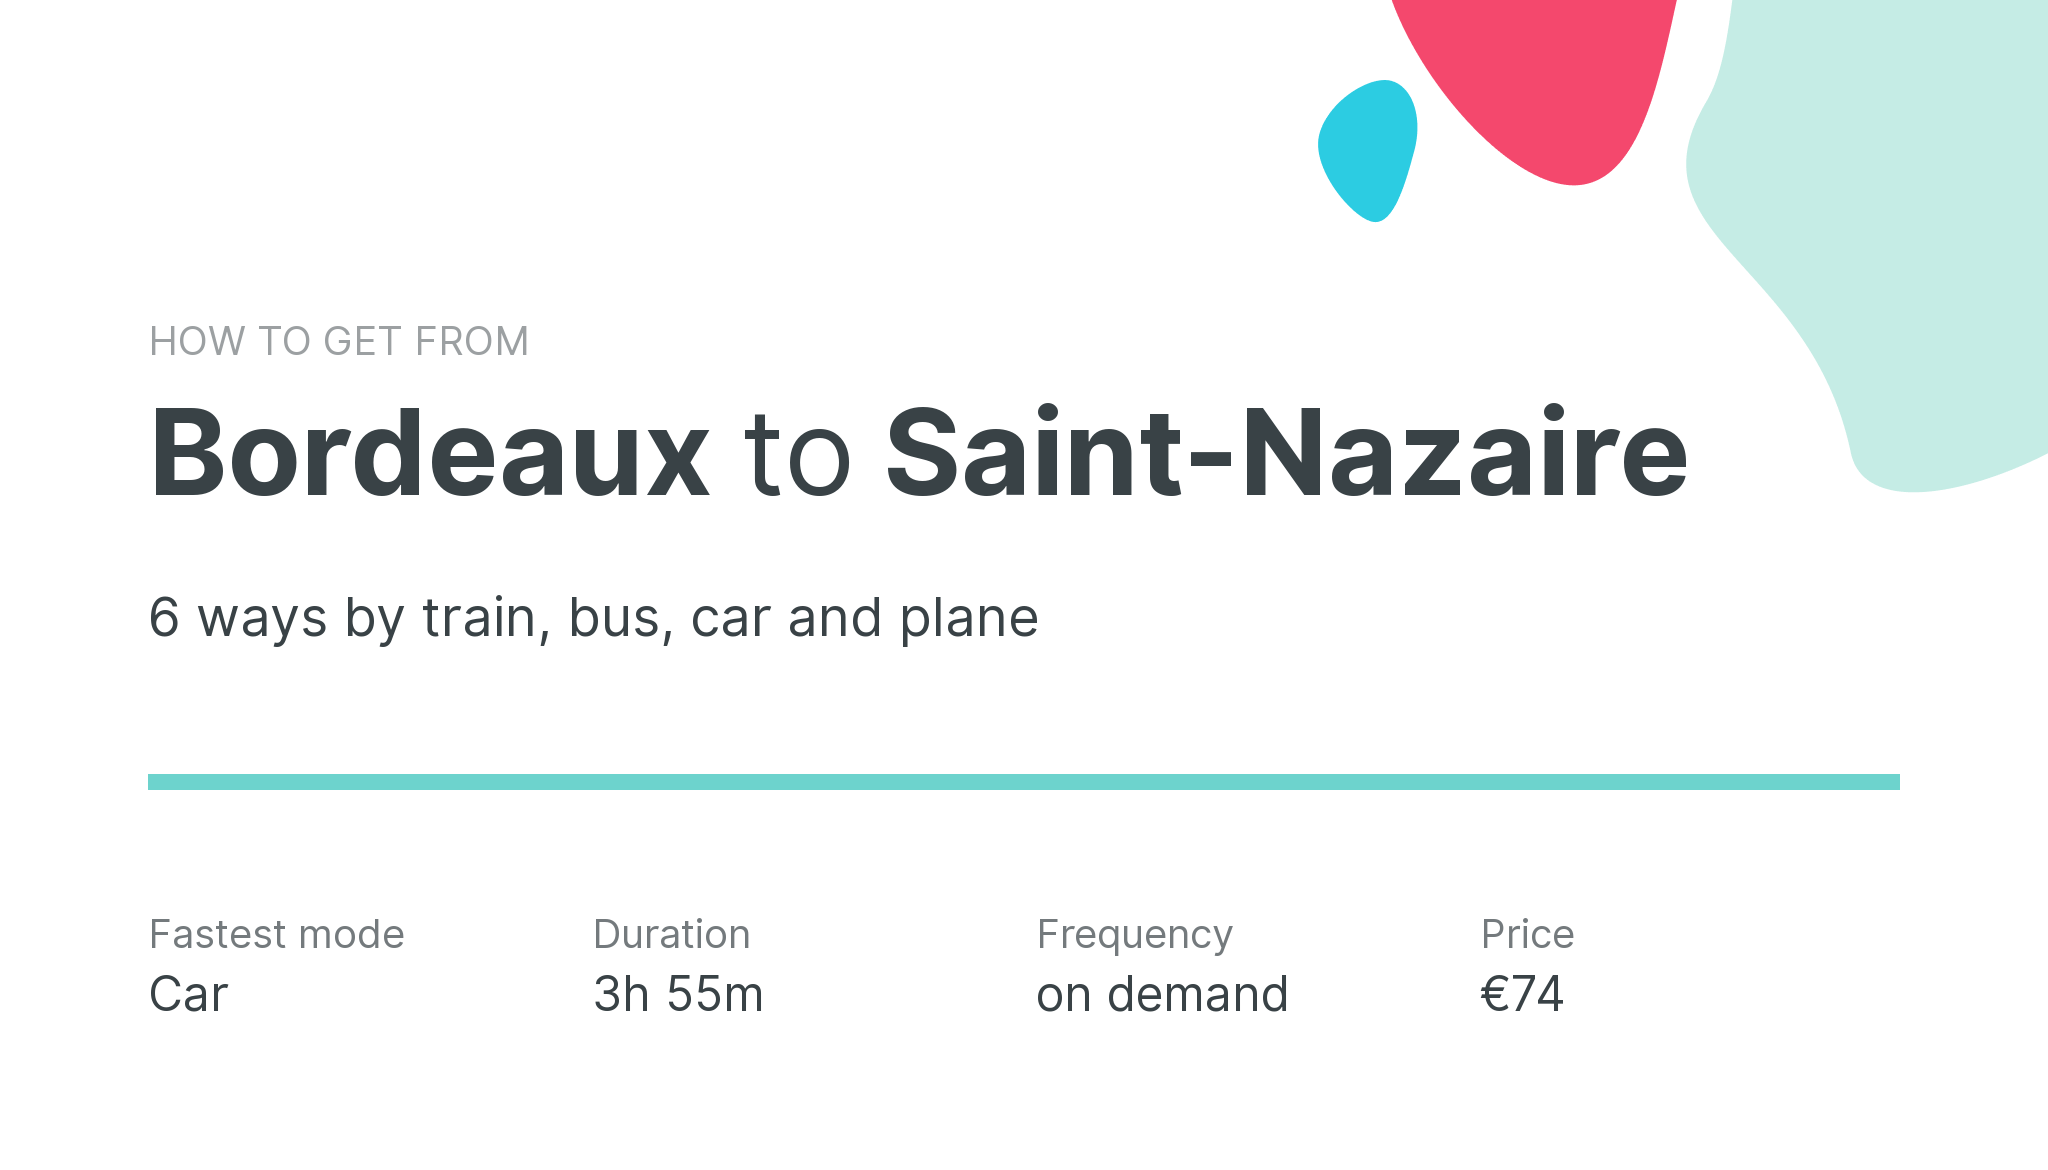 How do I get from Bordeaux to Saint-Nazaire